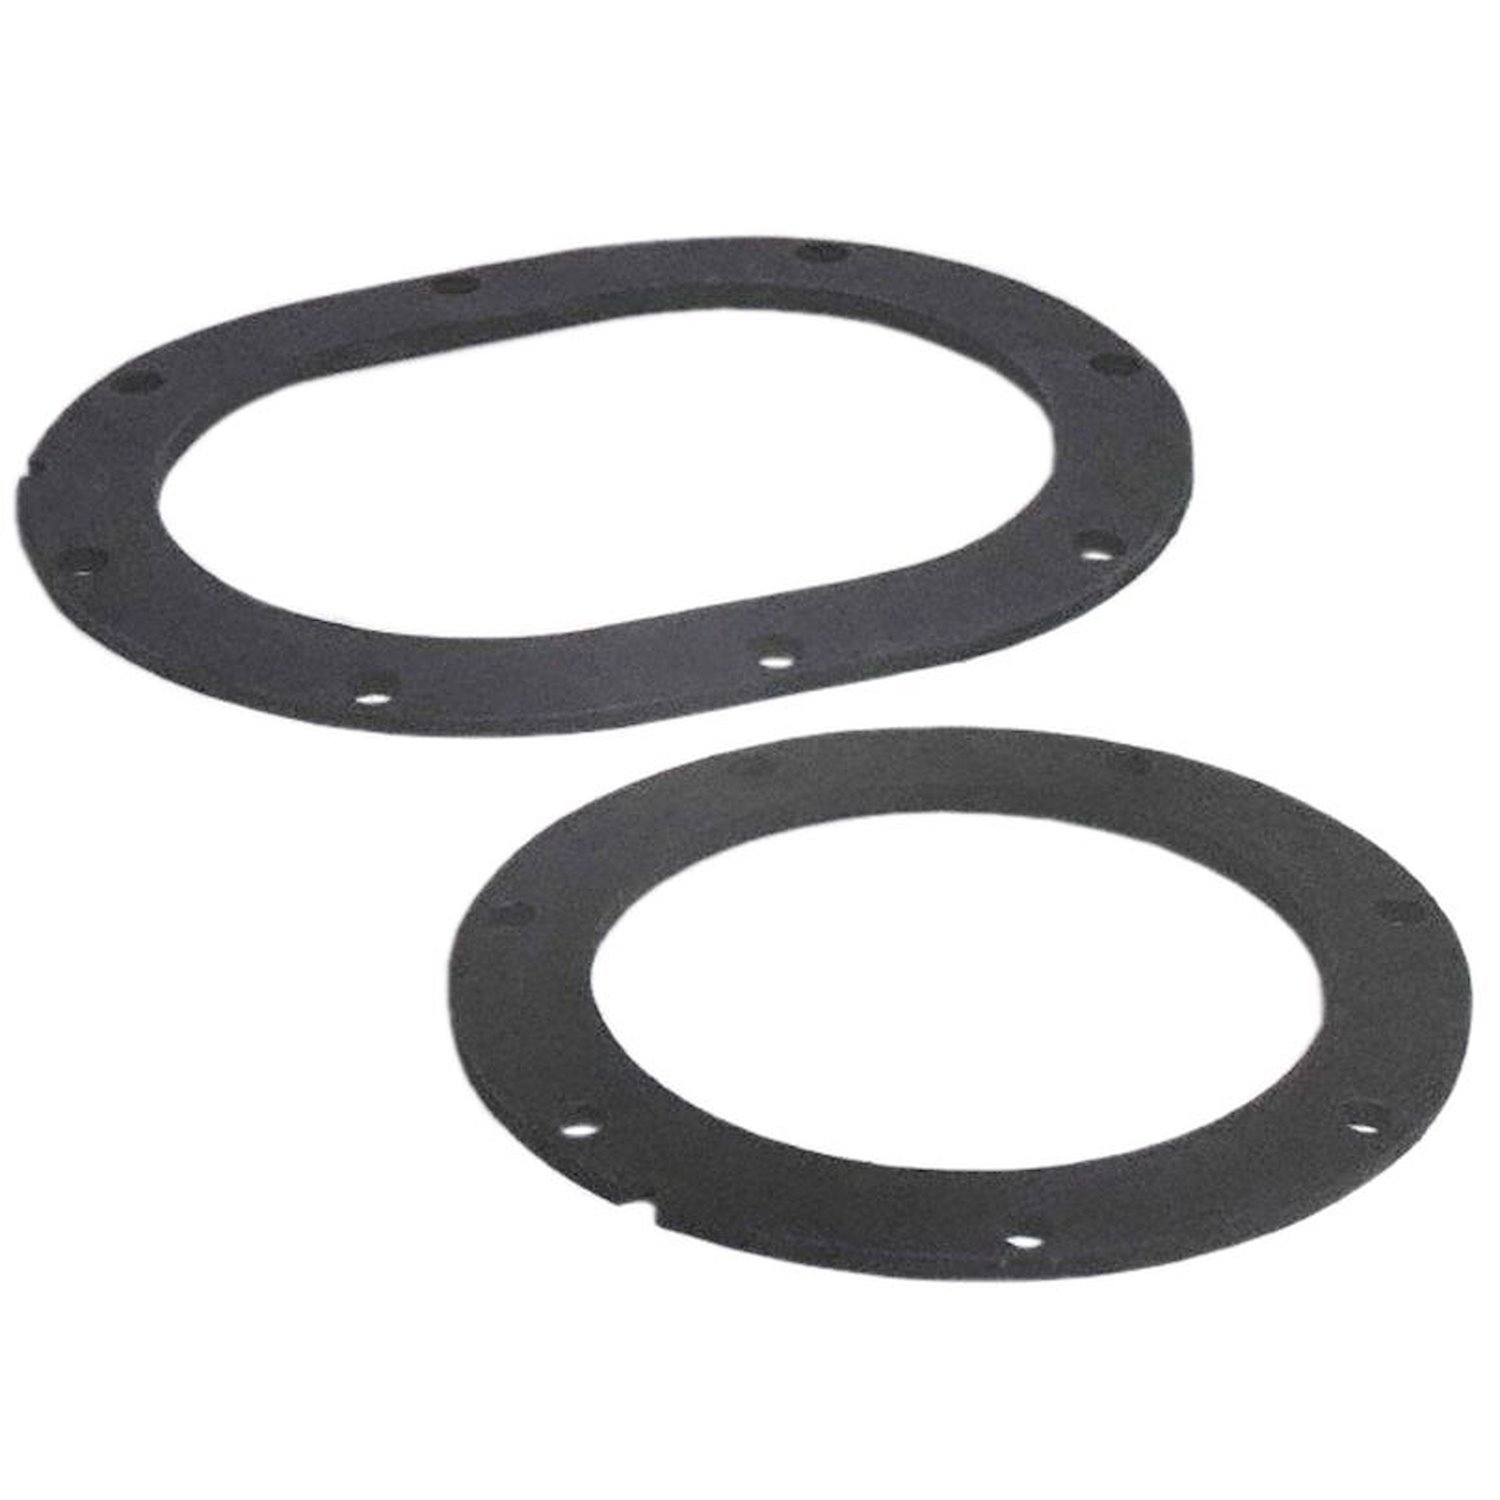 Fuel Pump Tank Seal for 1984-1993 Toyota